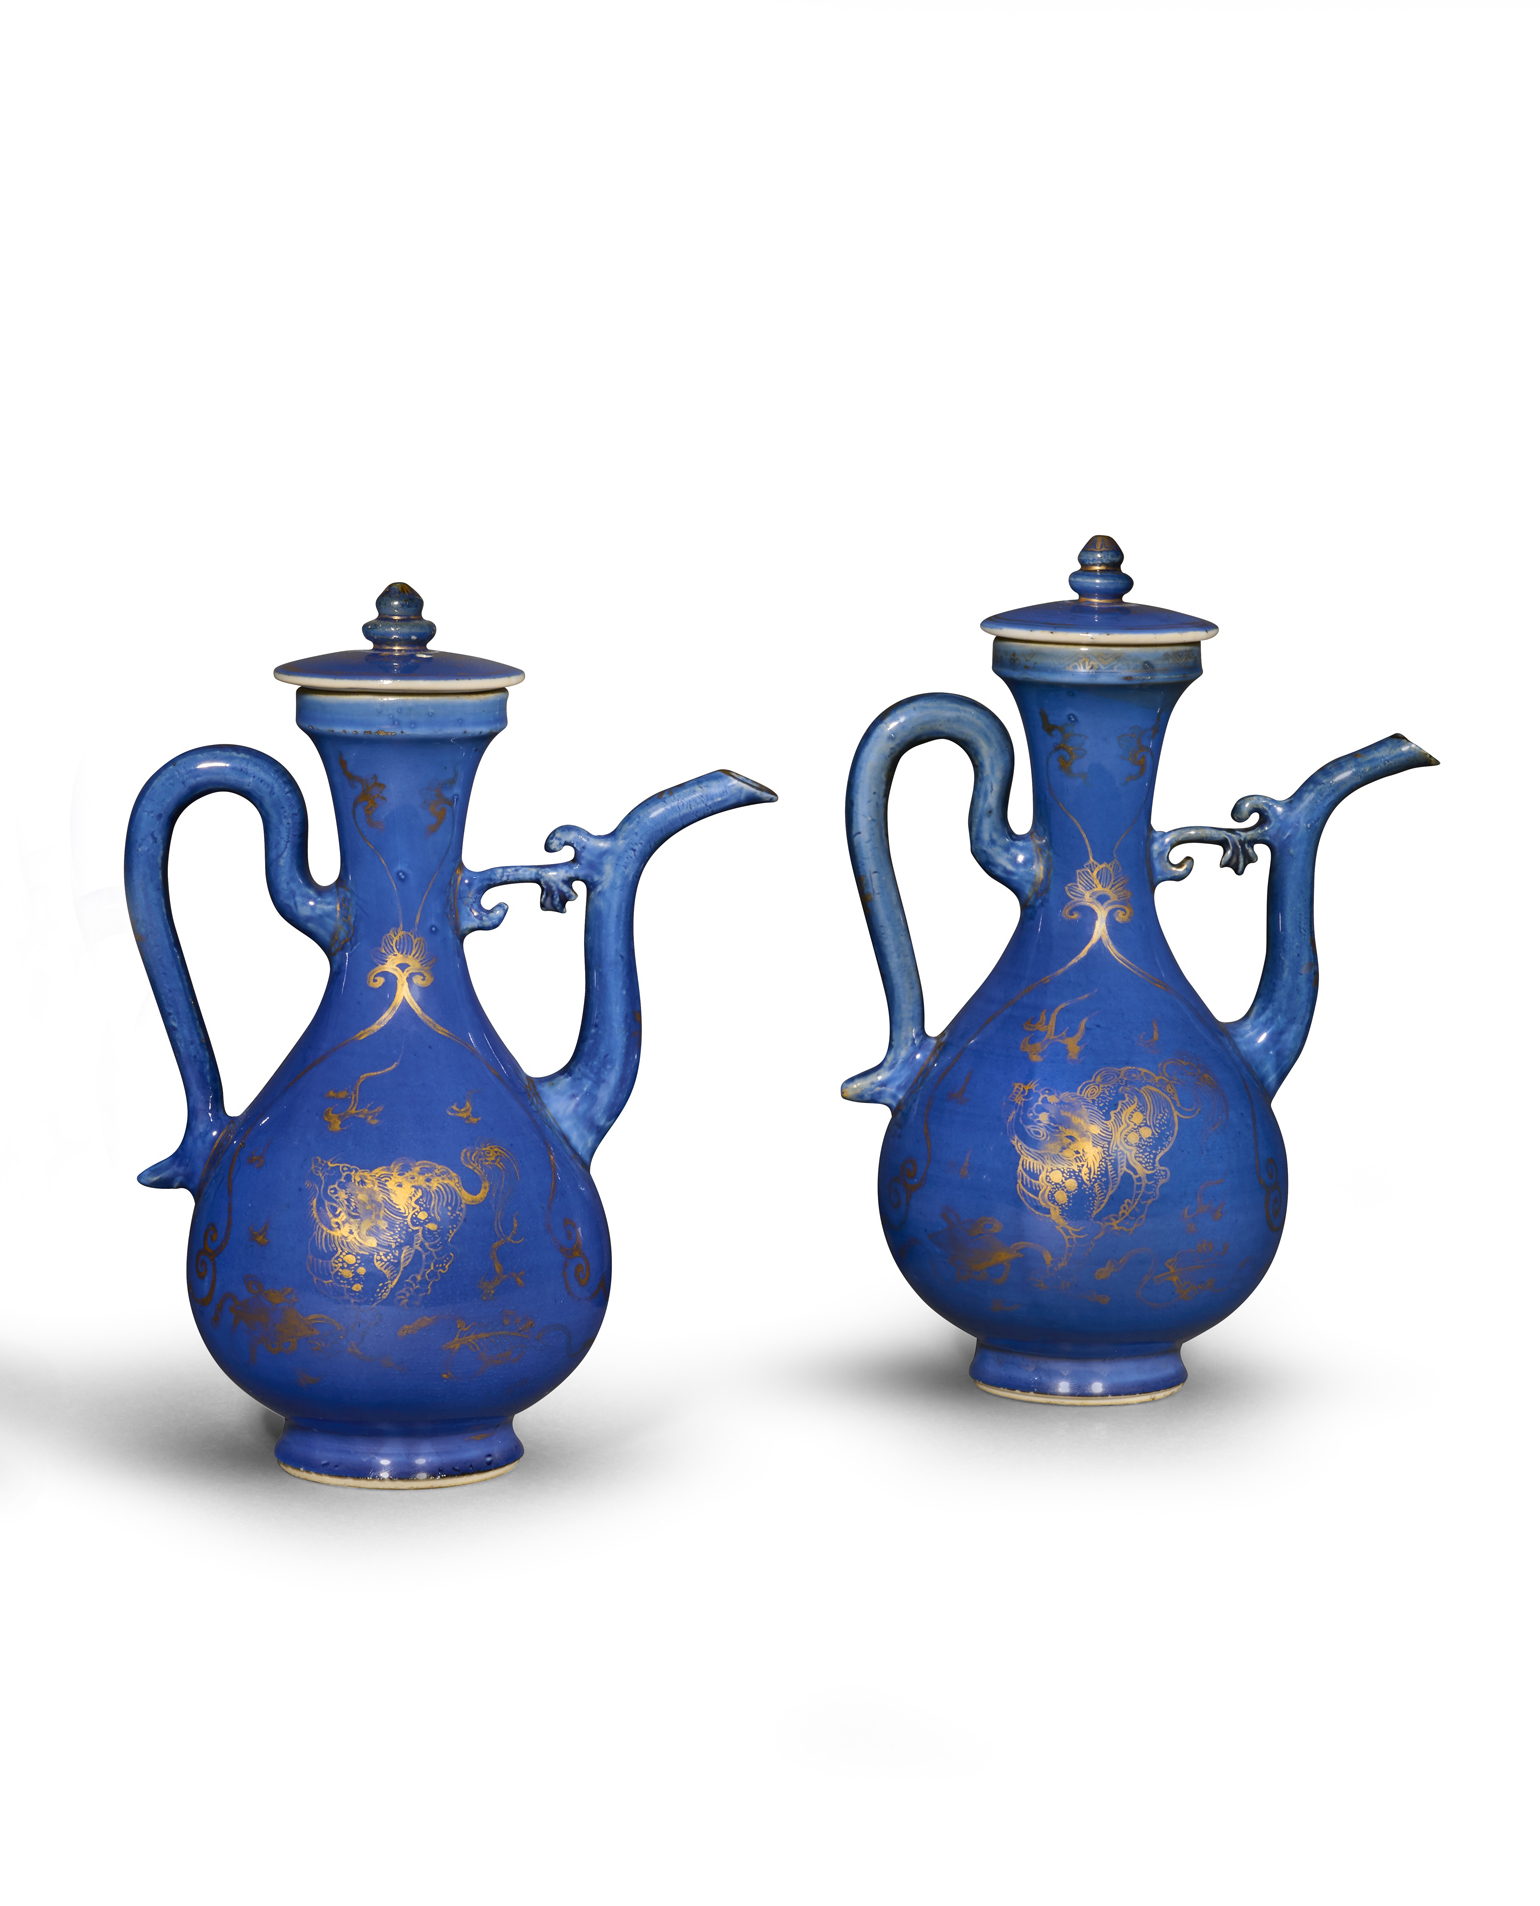 Pair of Ewers, Porcelain decorated in blue ground and overglaze gold, China - Qing dynasty, Kangxi period (1662-1722), H. 20.5 cm L. 14.5 cm W. 10 cm